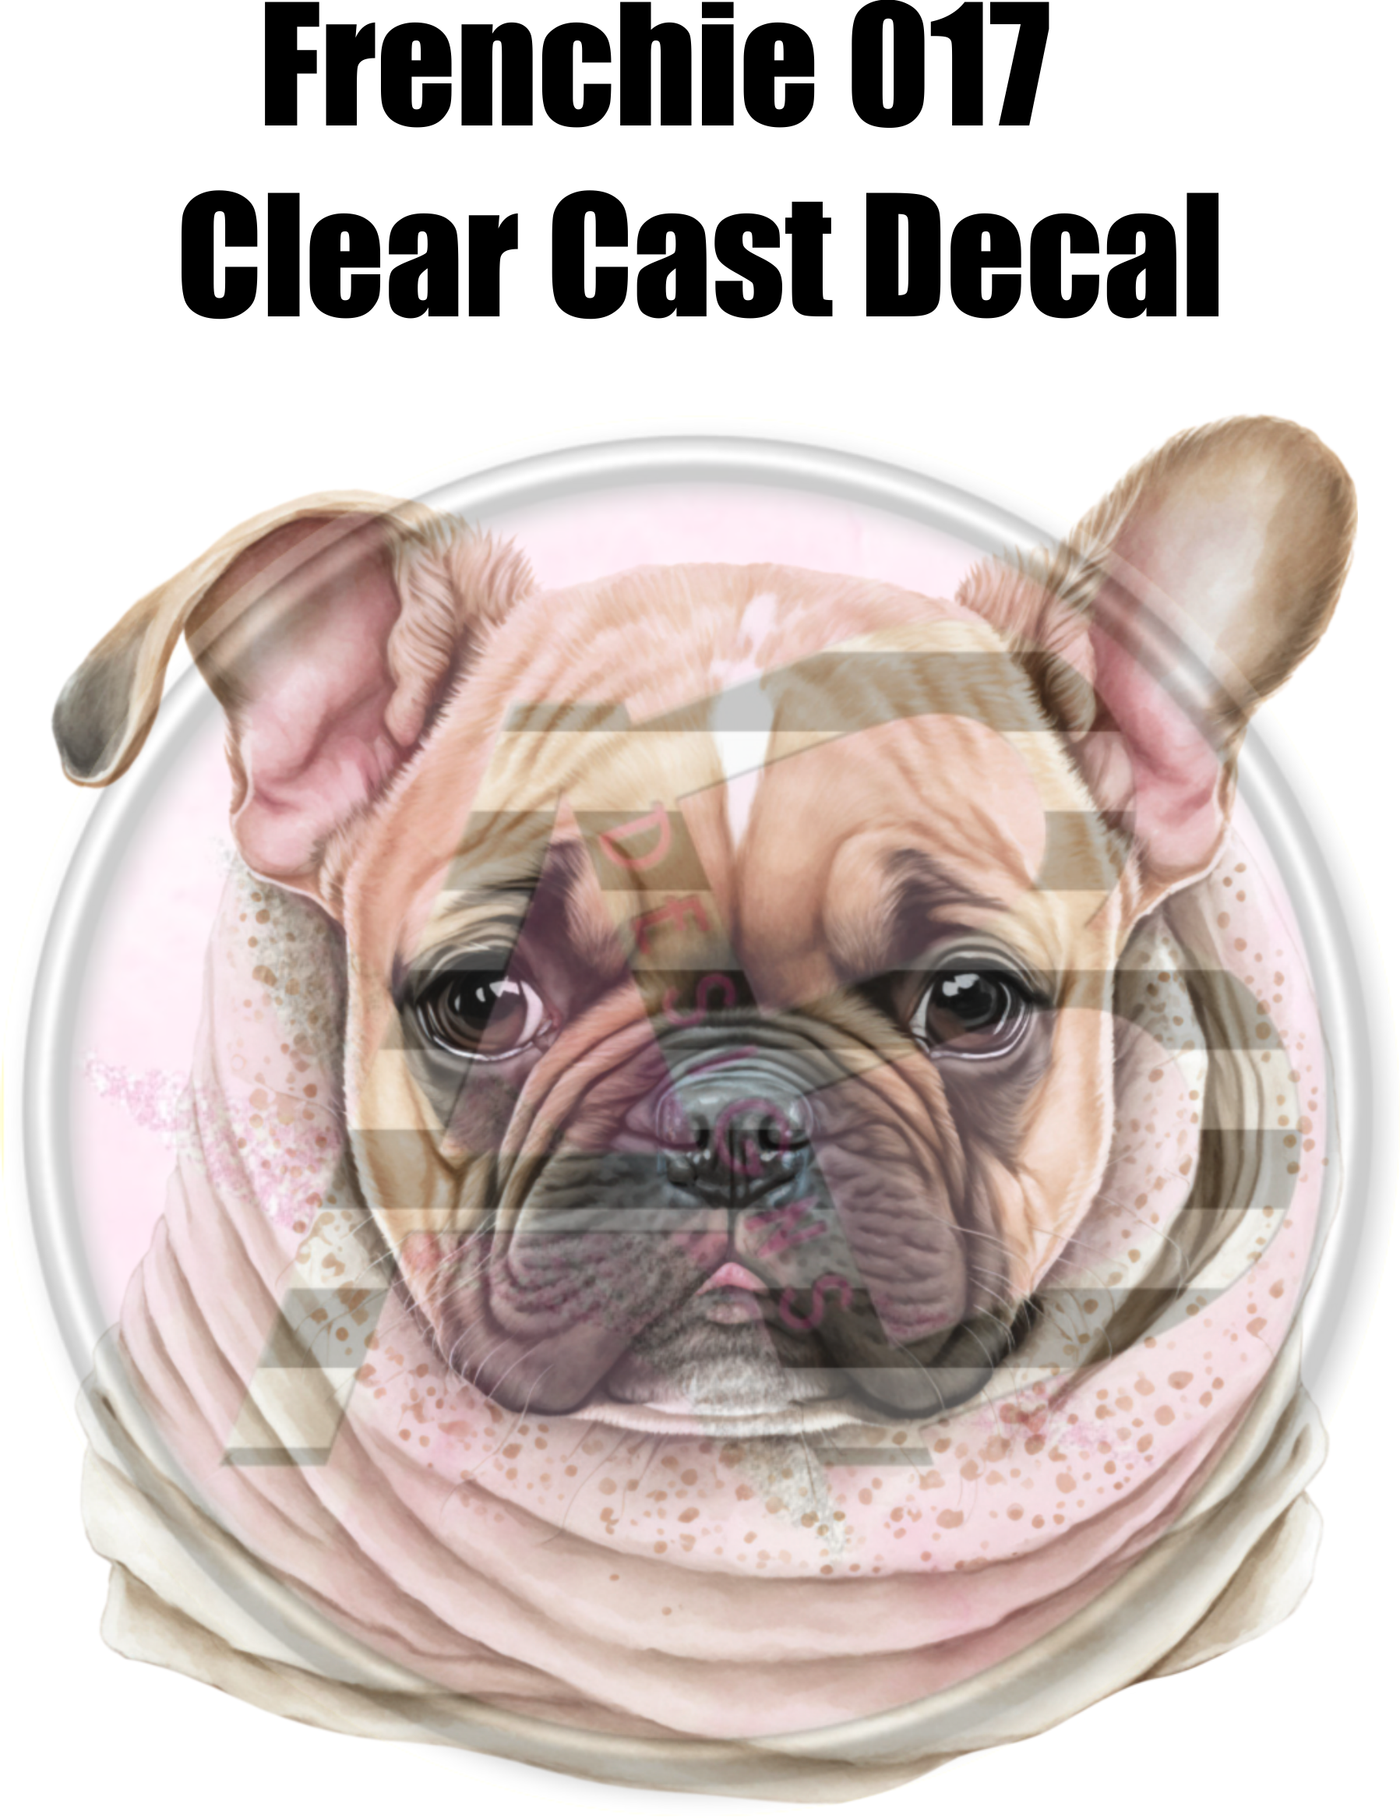 Frenchie 017 - Clear Cast Decal